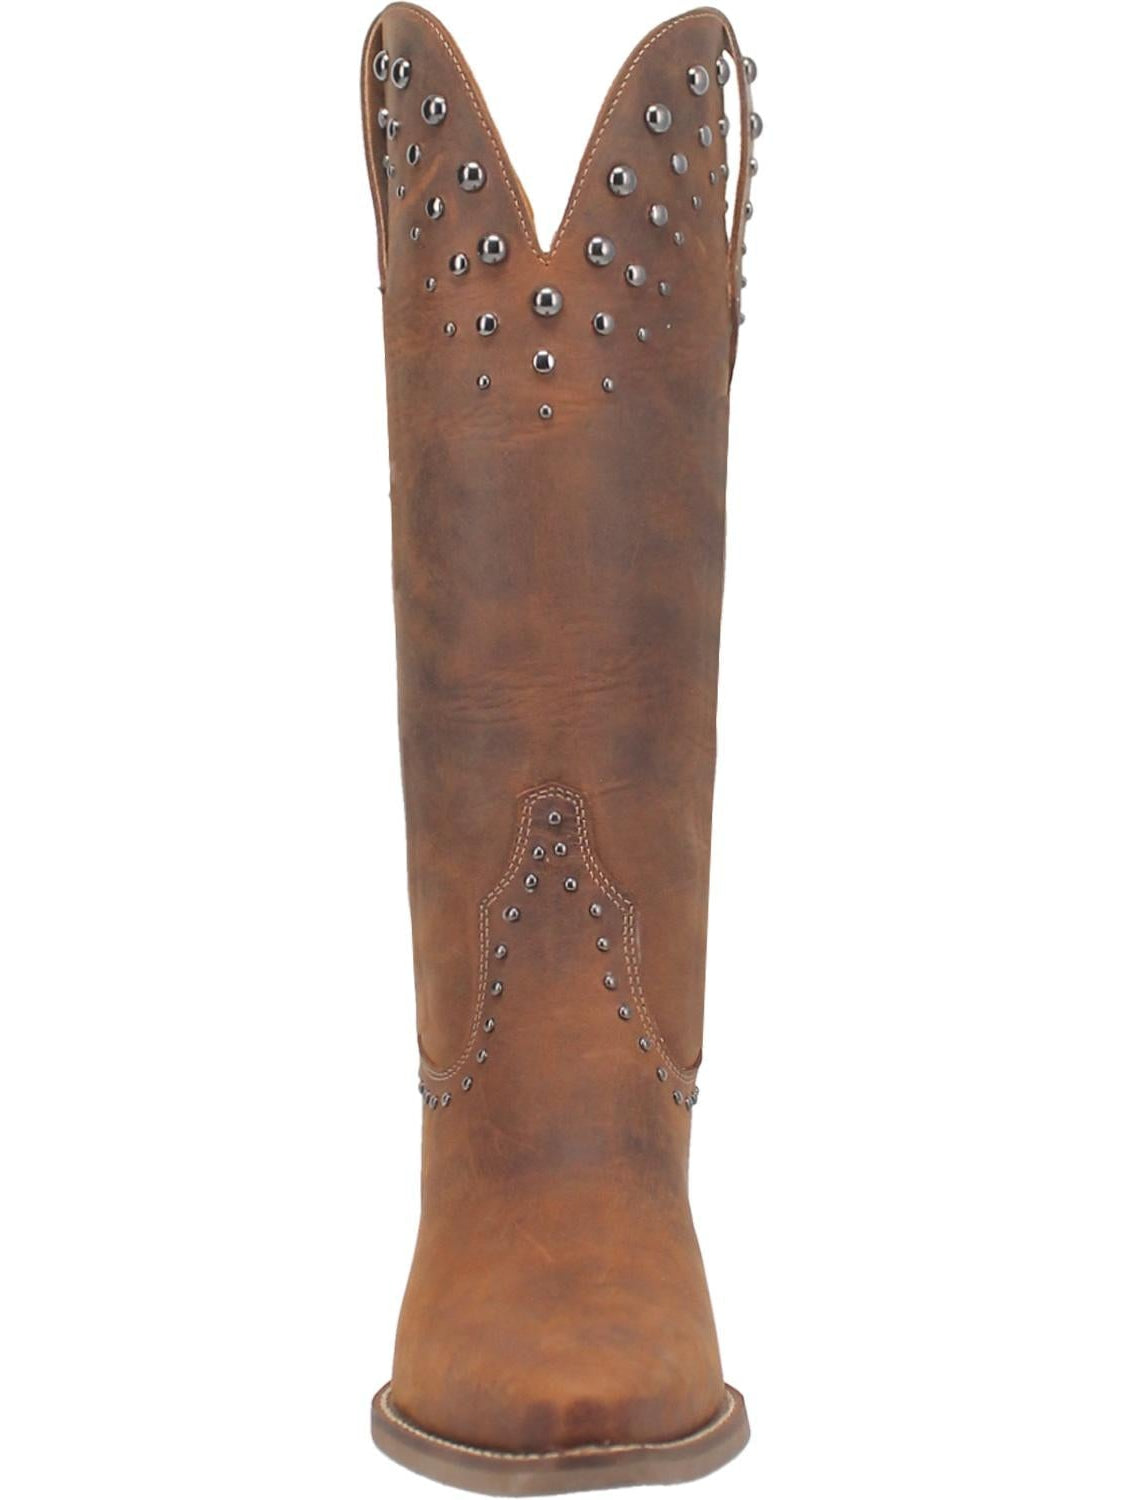 Talkin Rodeo Boot by Dingo from Dan Post - Brown